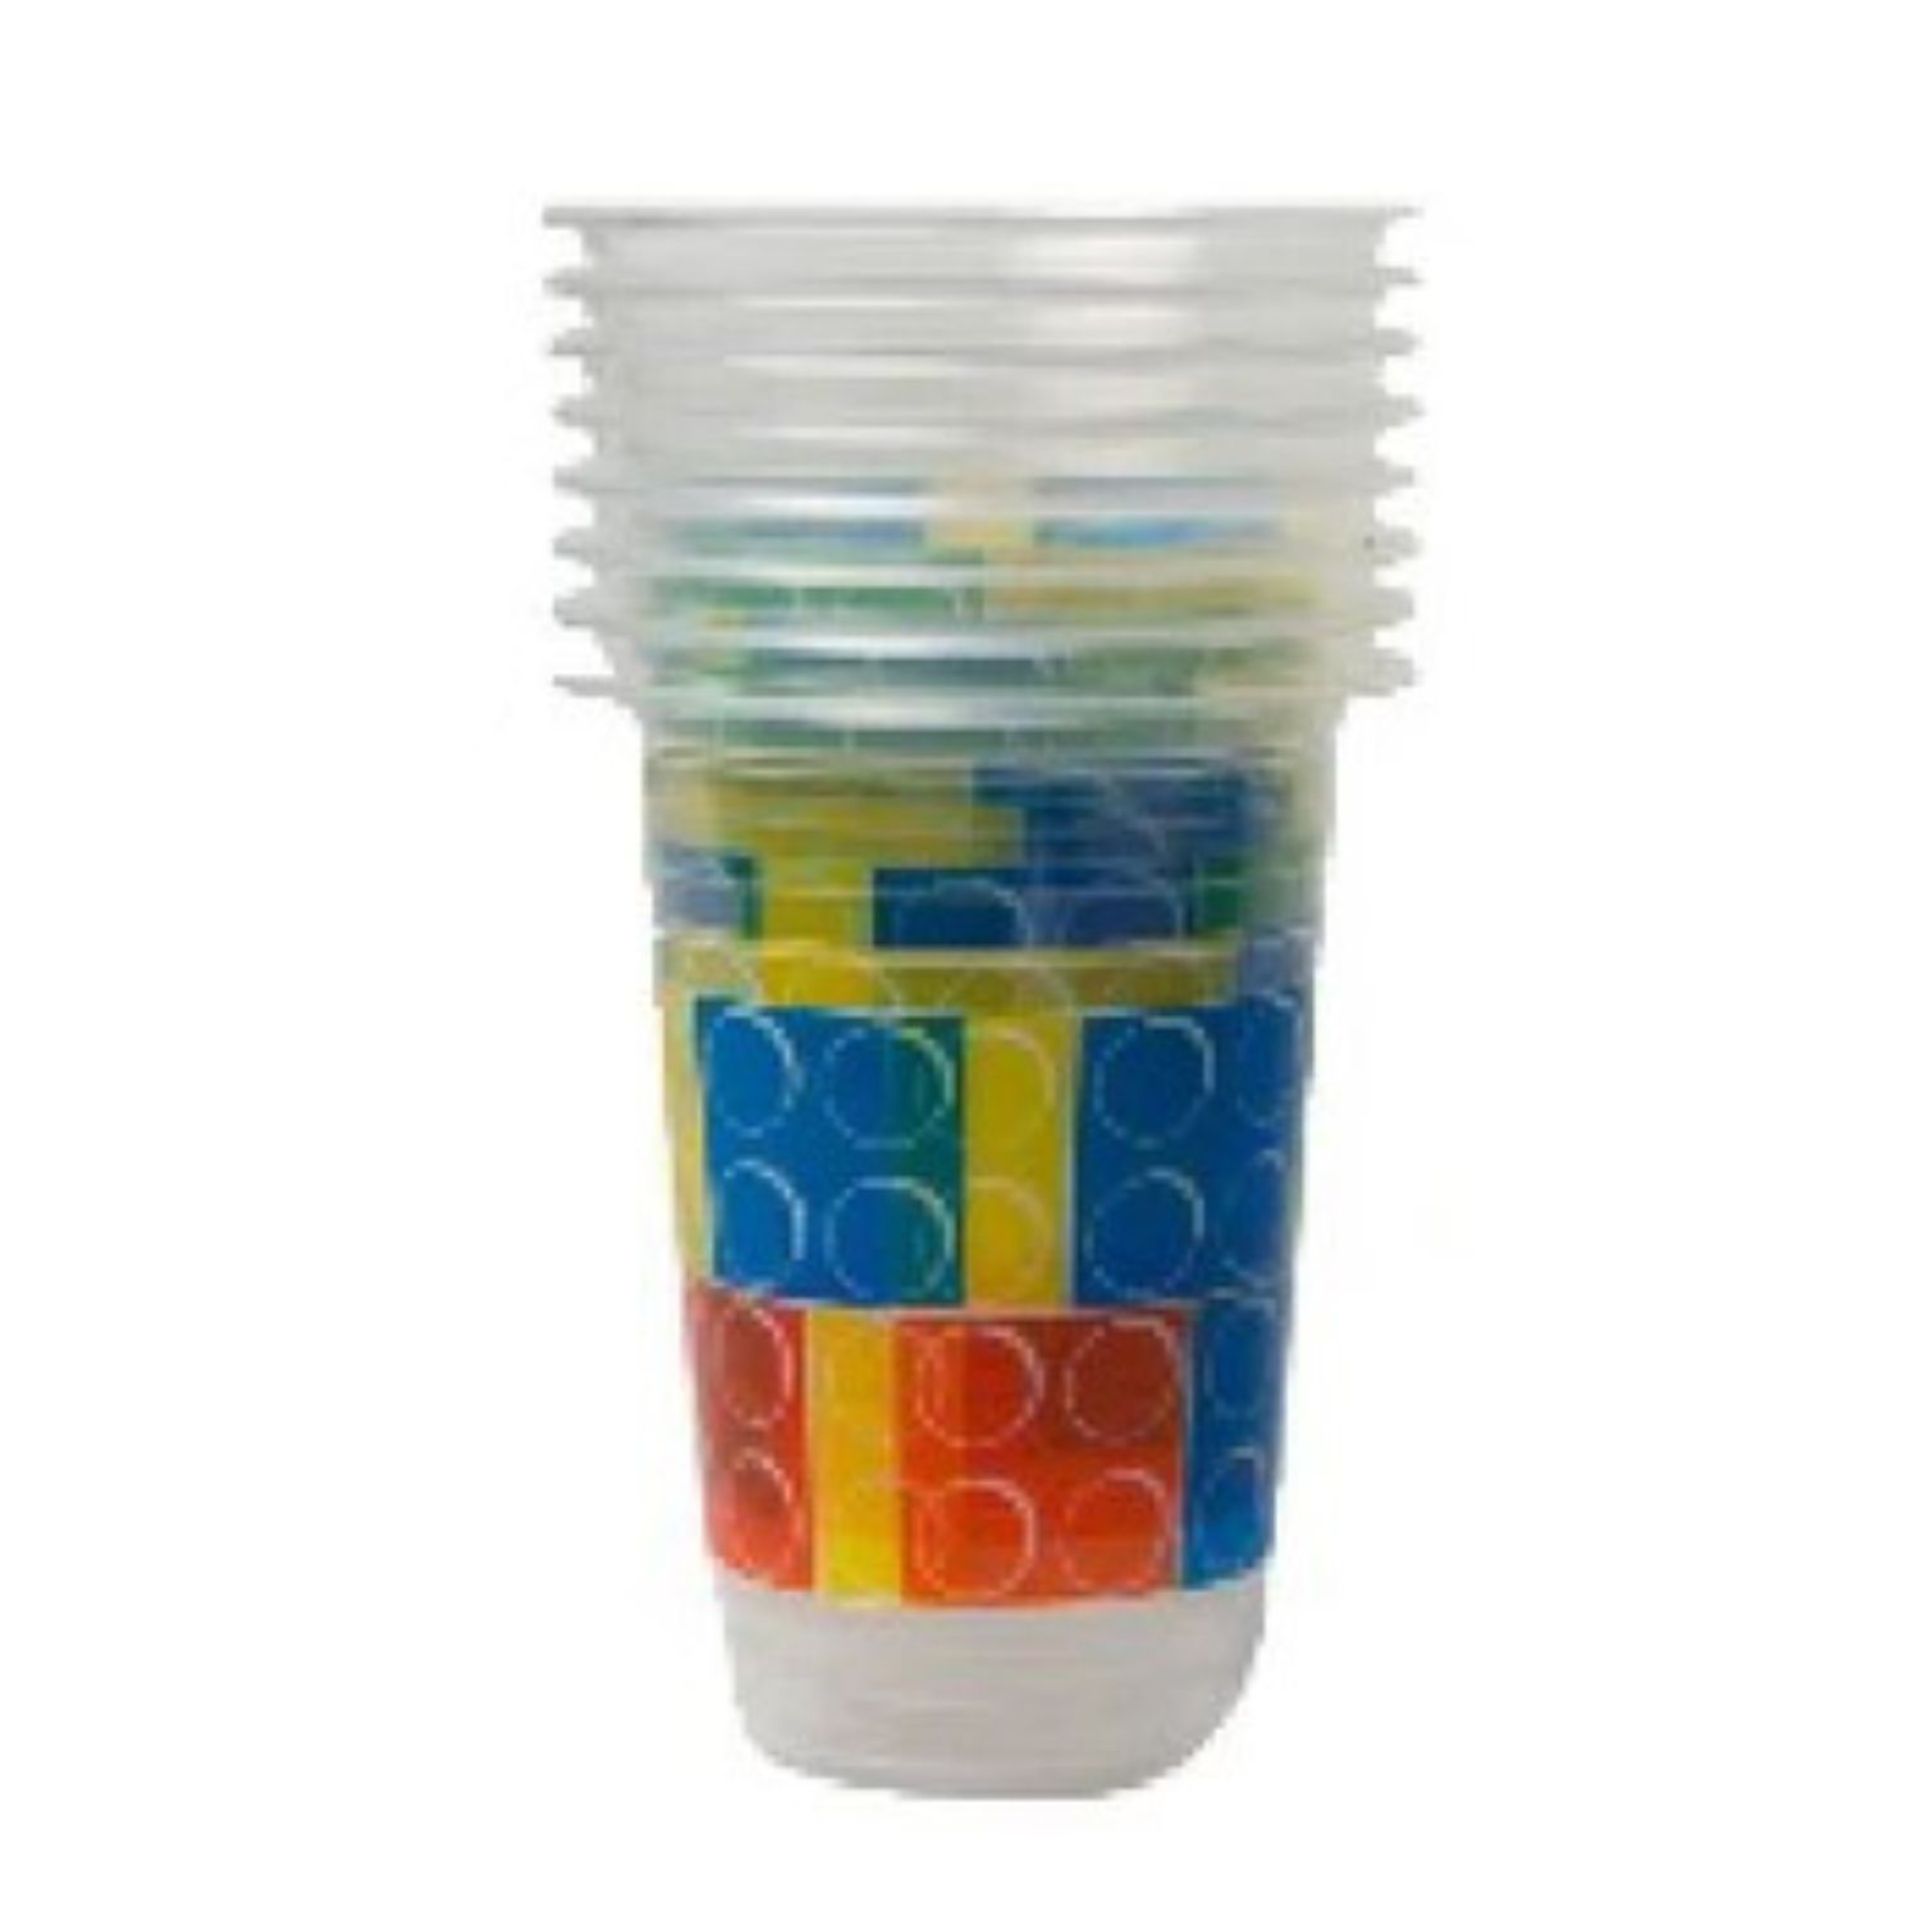 8000 CUPS BRIGHT BUILDING BLOCKS CUPS, GREAT FOR PARTIES, RRP £10,000